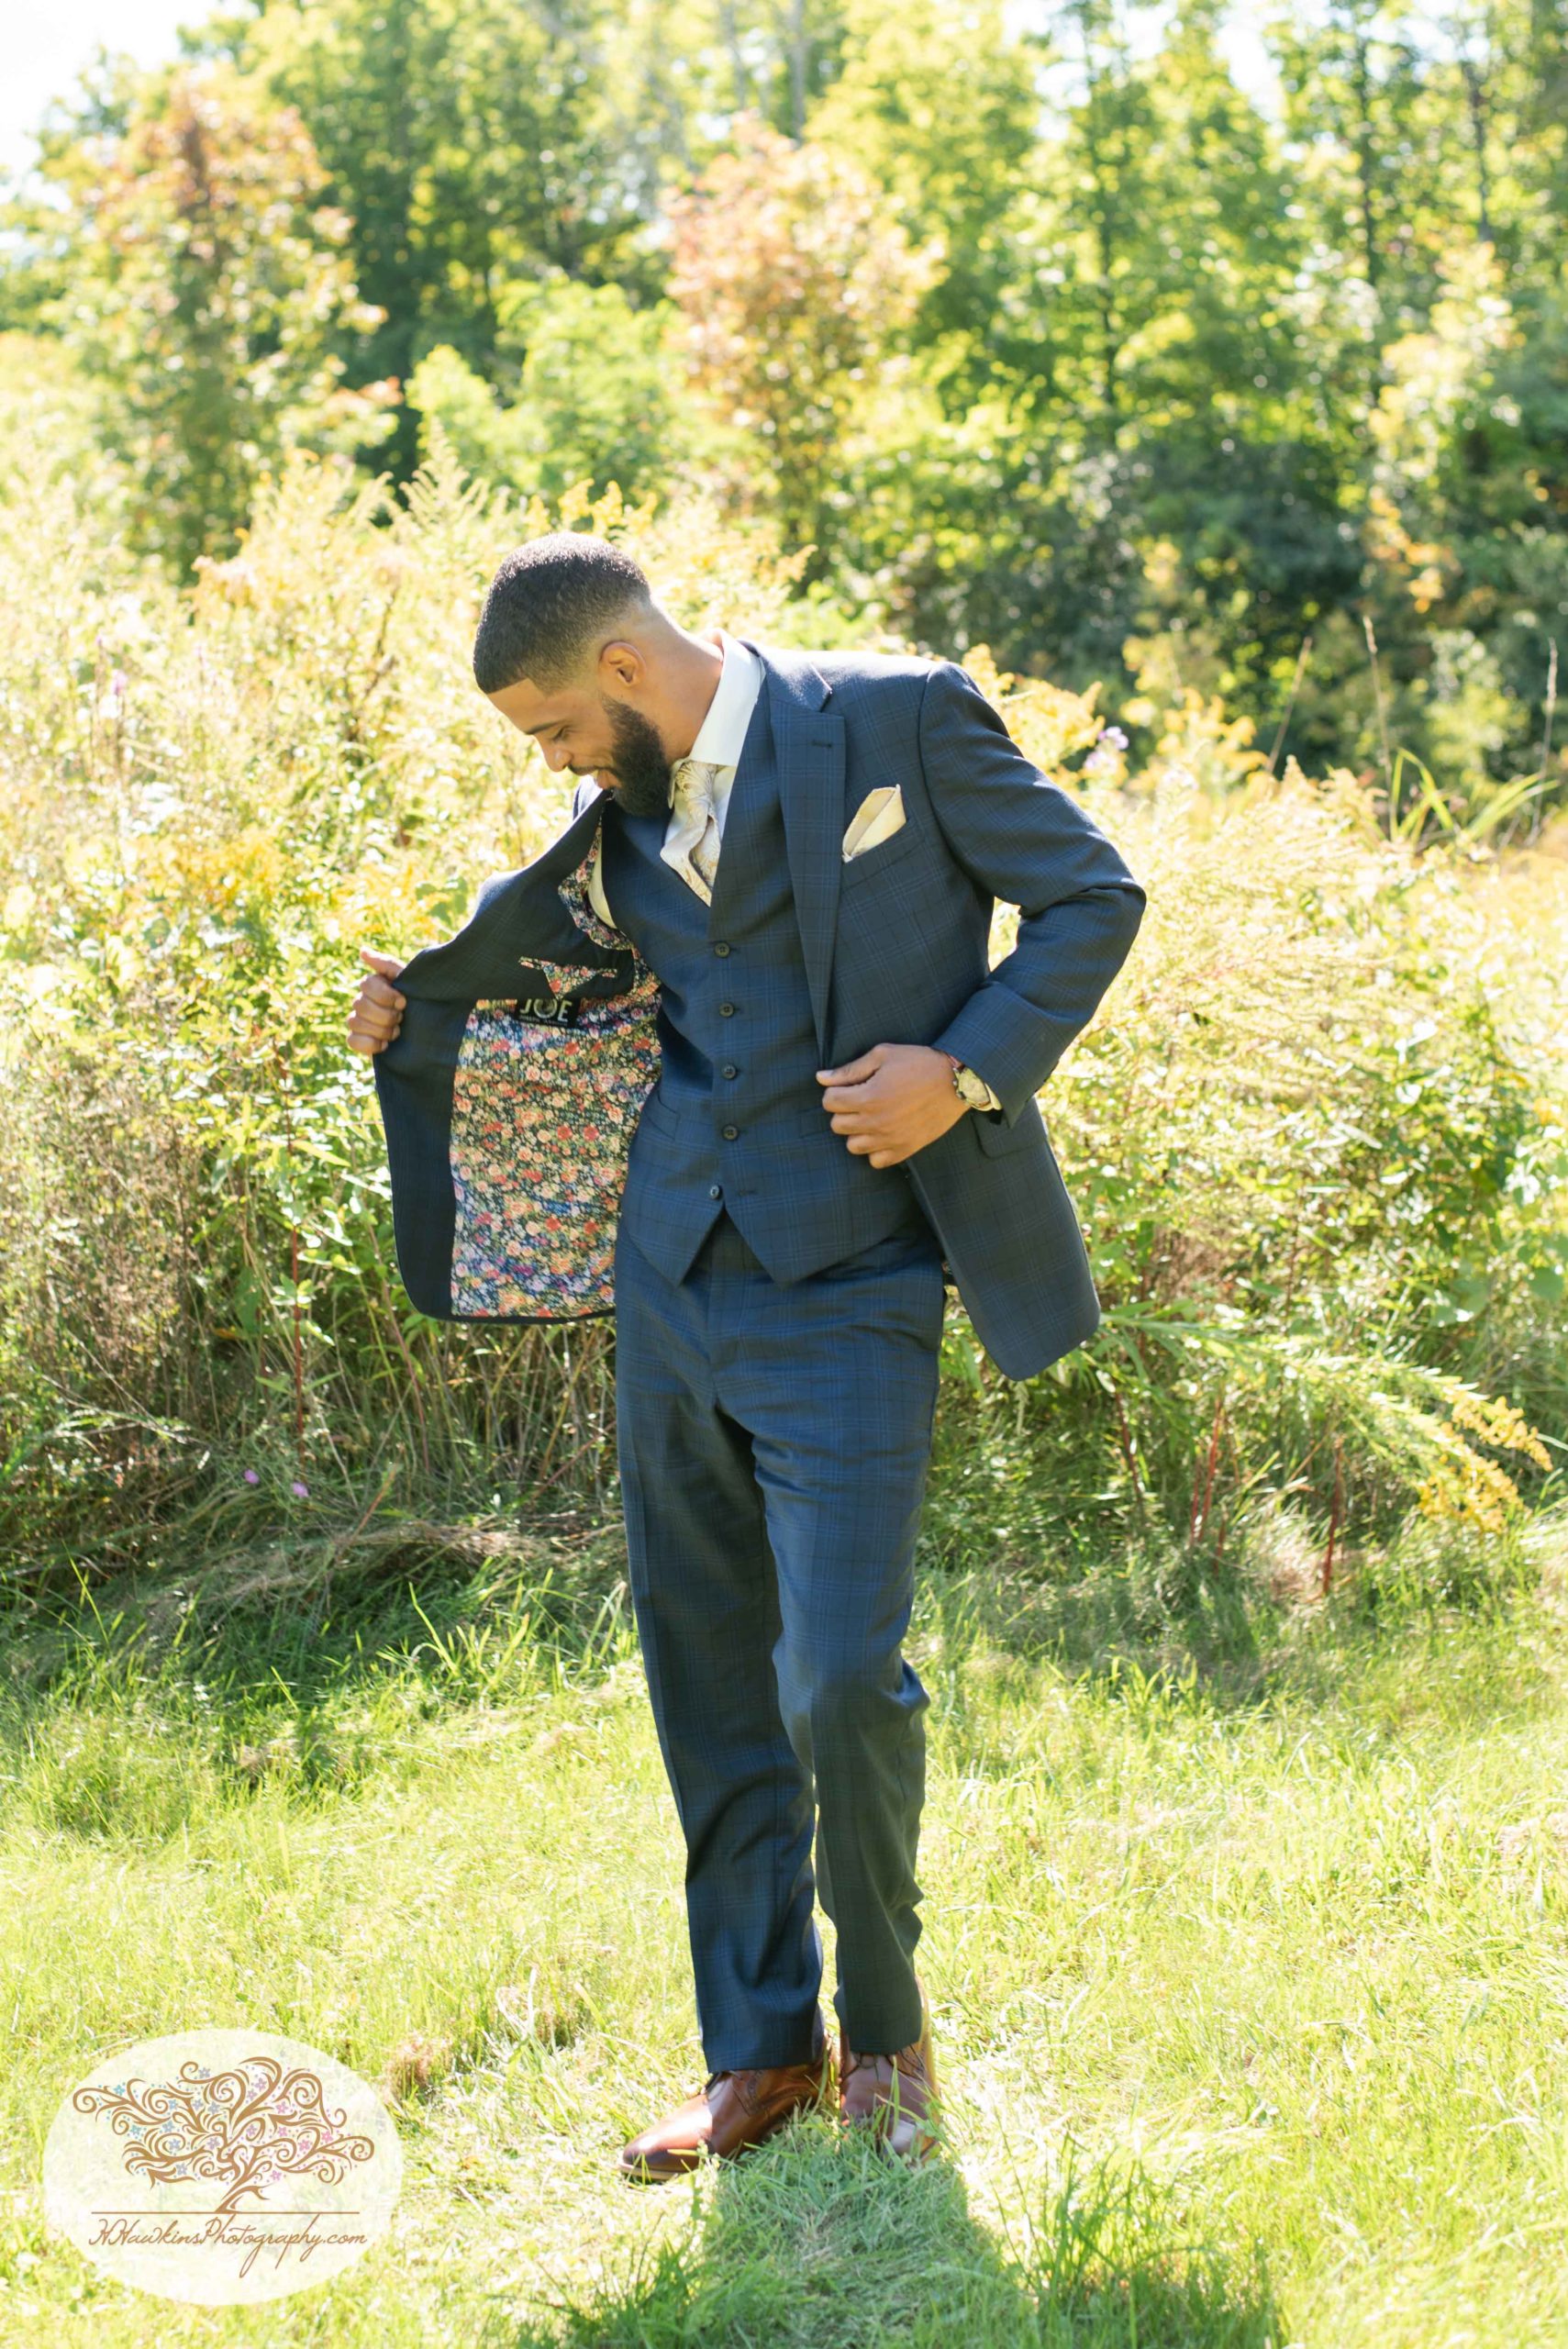 Groom and his custom made suit jacket in a field with sunshine behind him